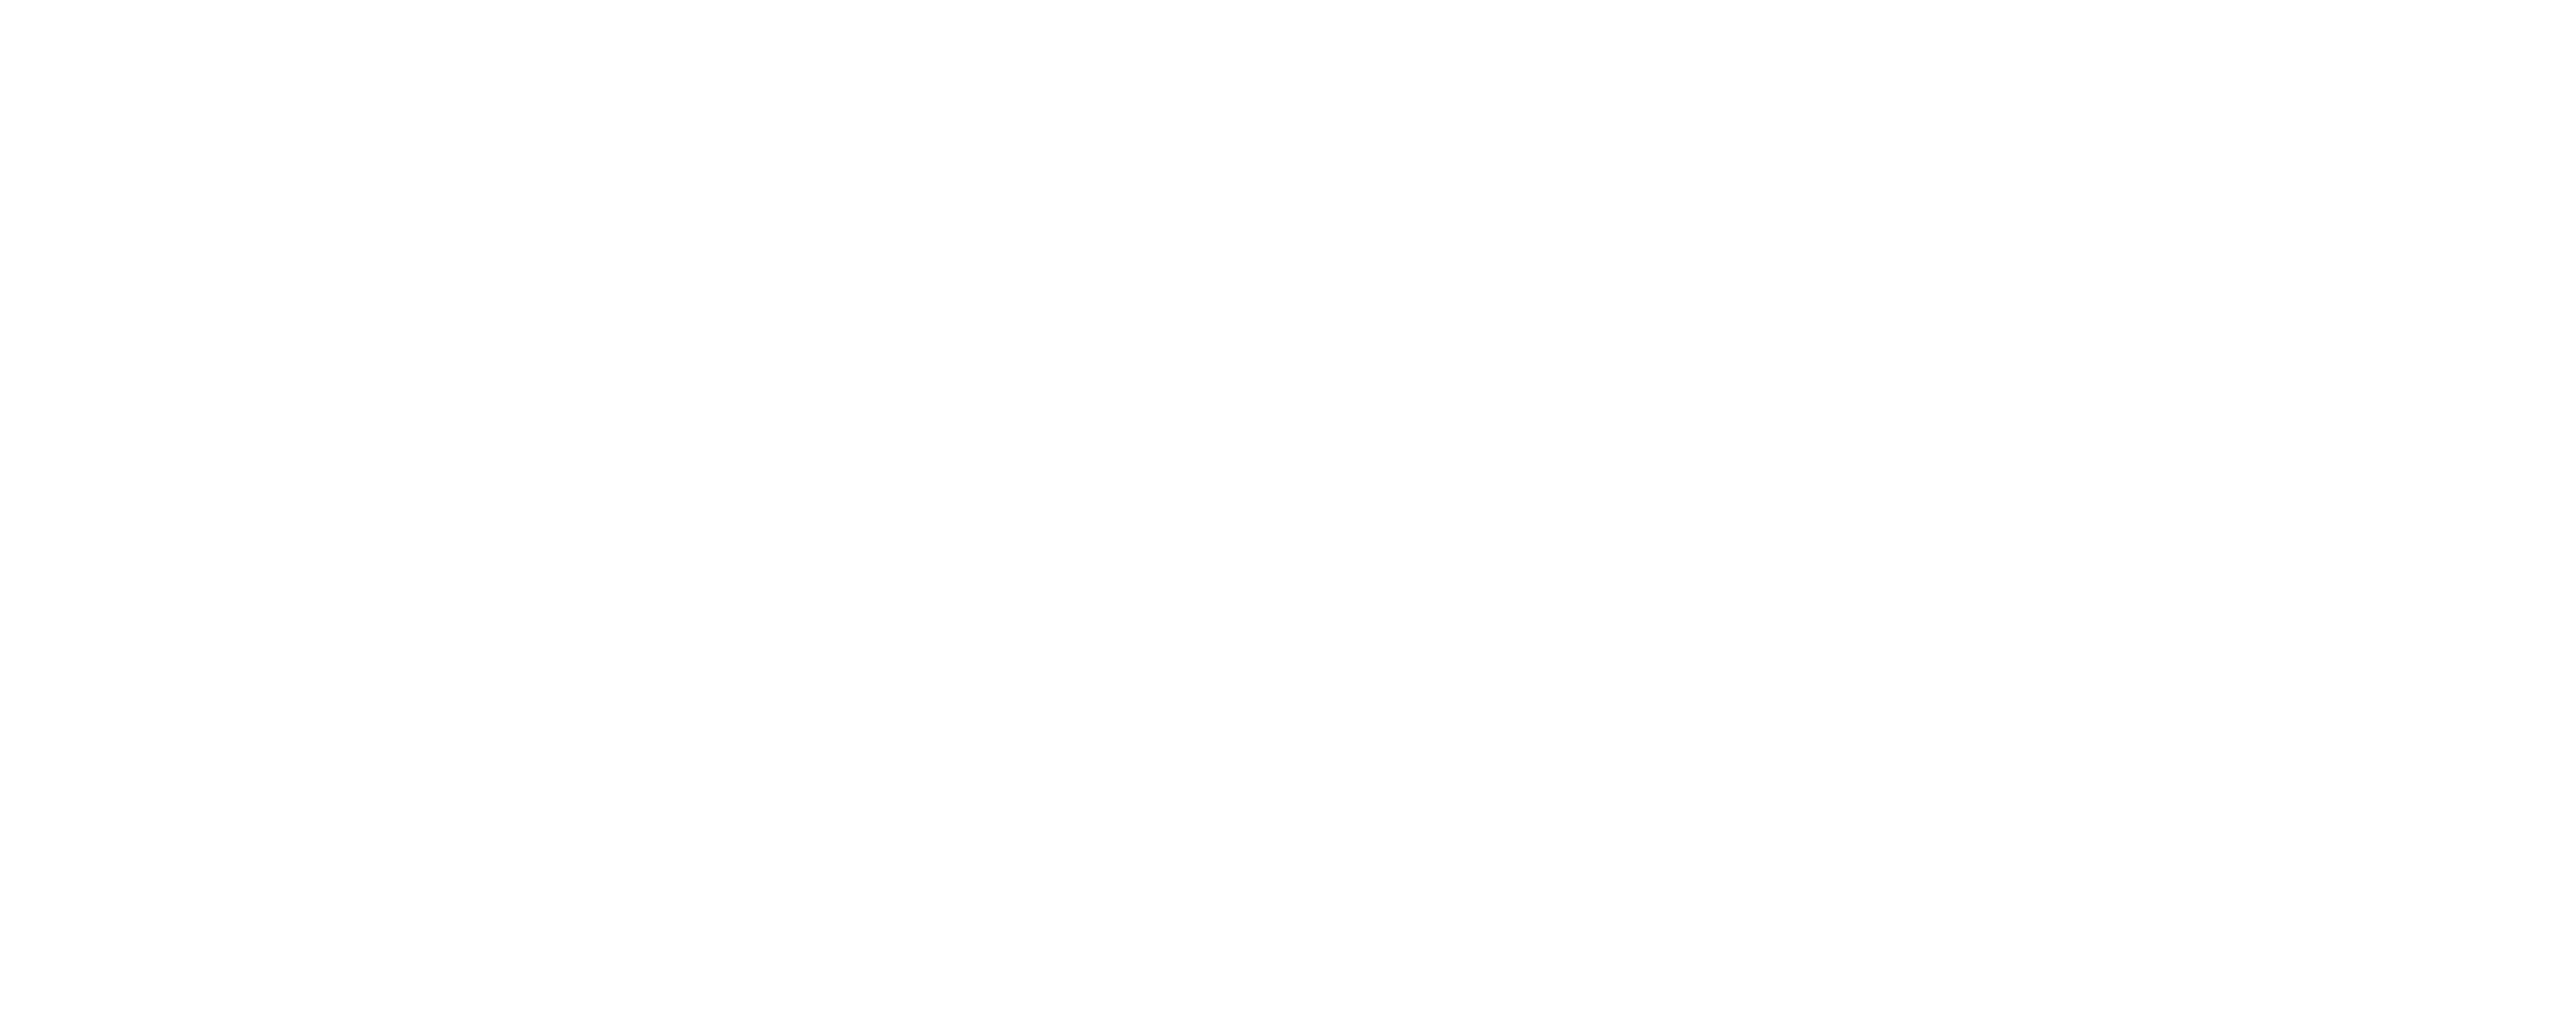 Vickers Design Group